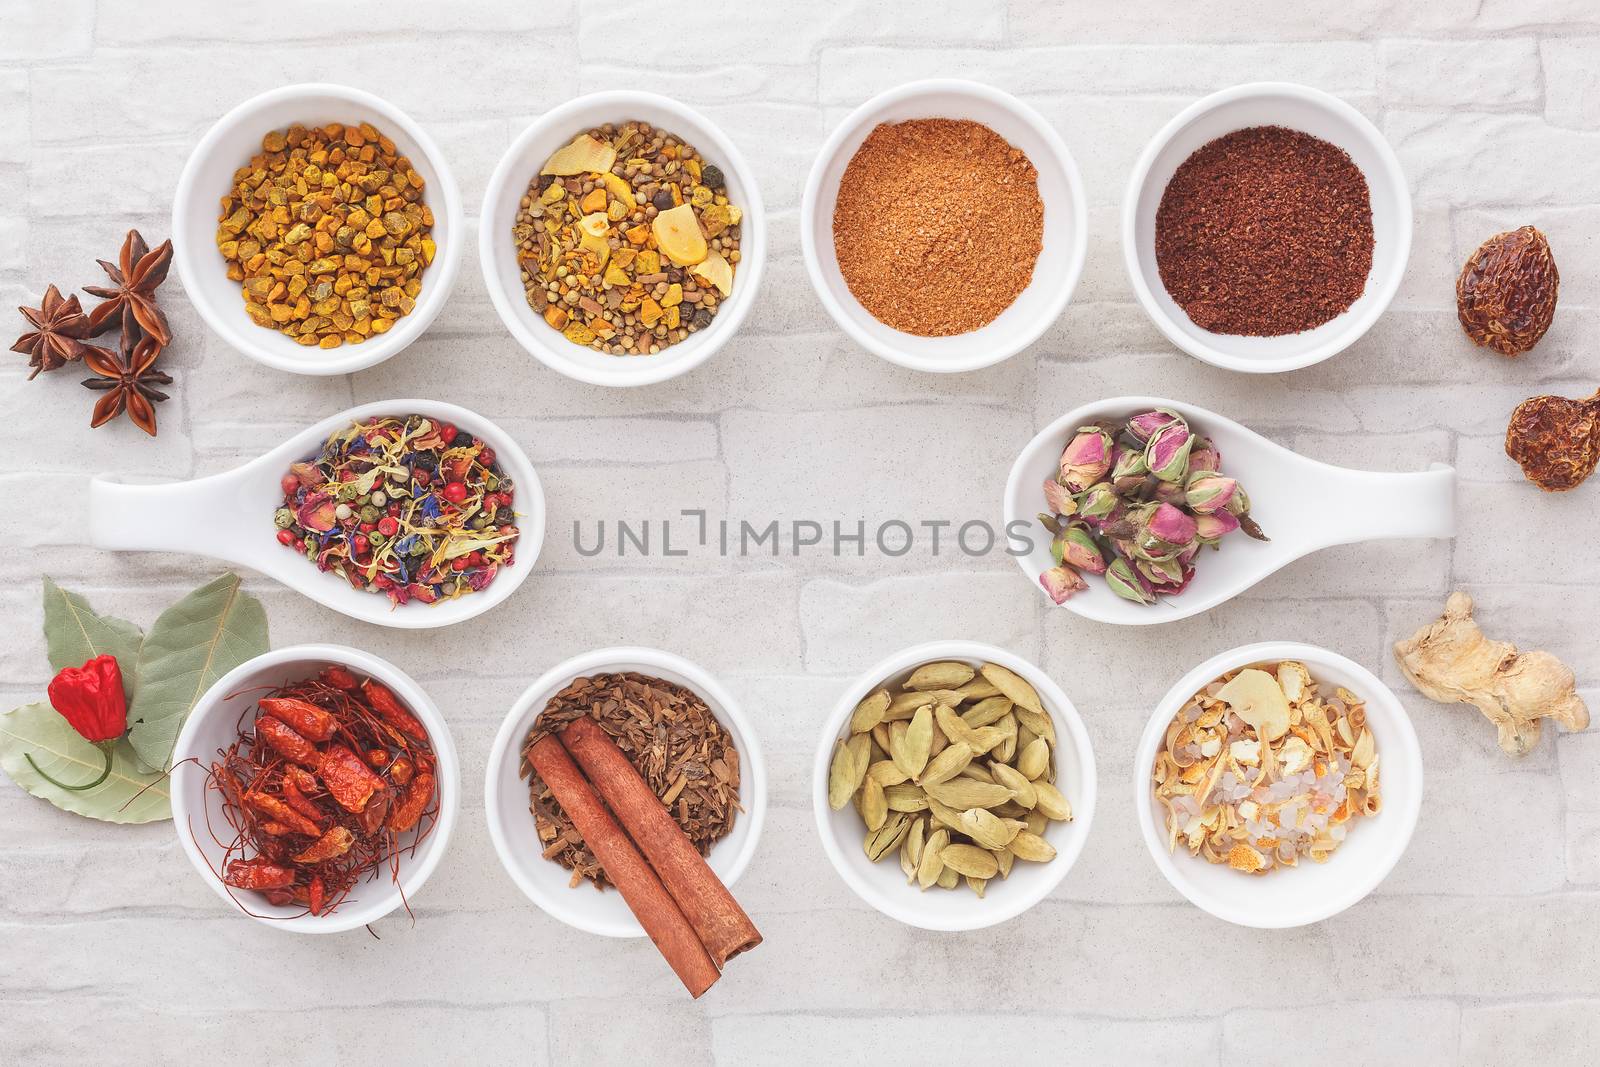 A collection of ground and whole spices. Top view, blank space, vintage toned image. Natural light